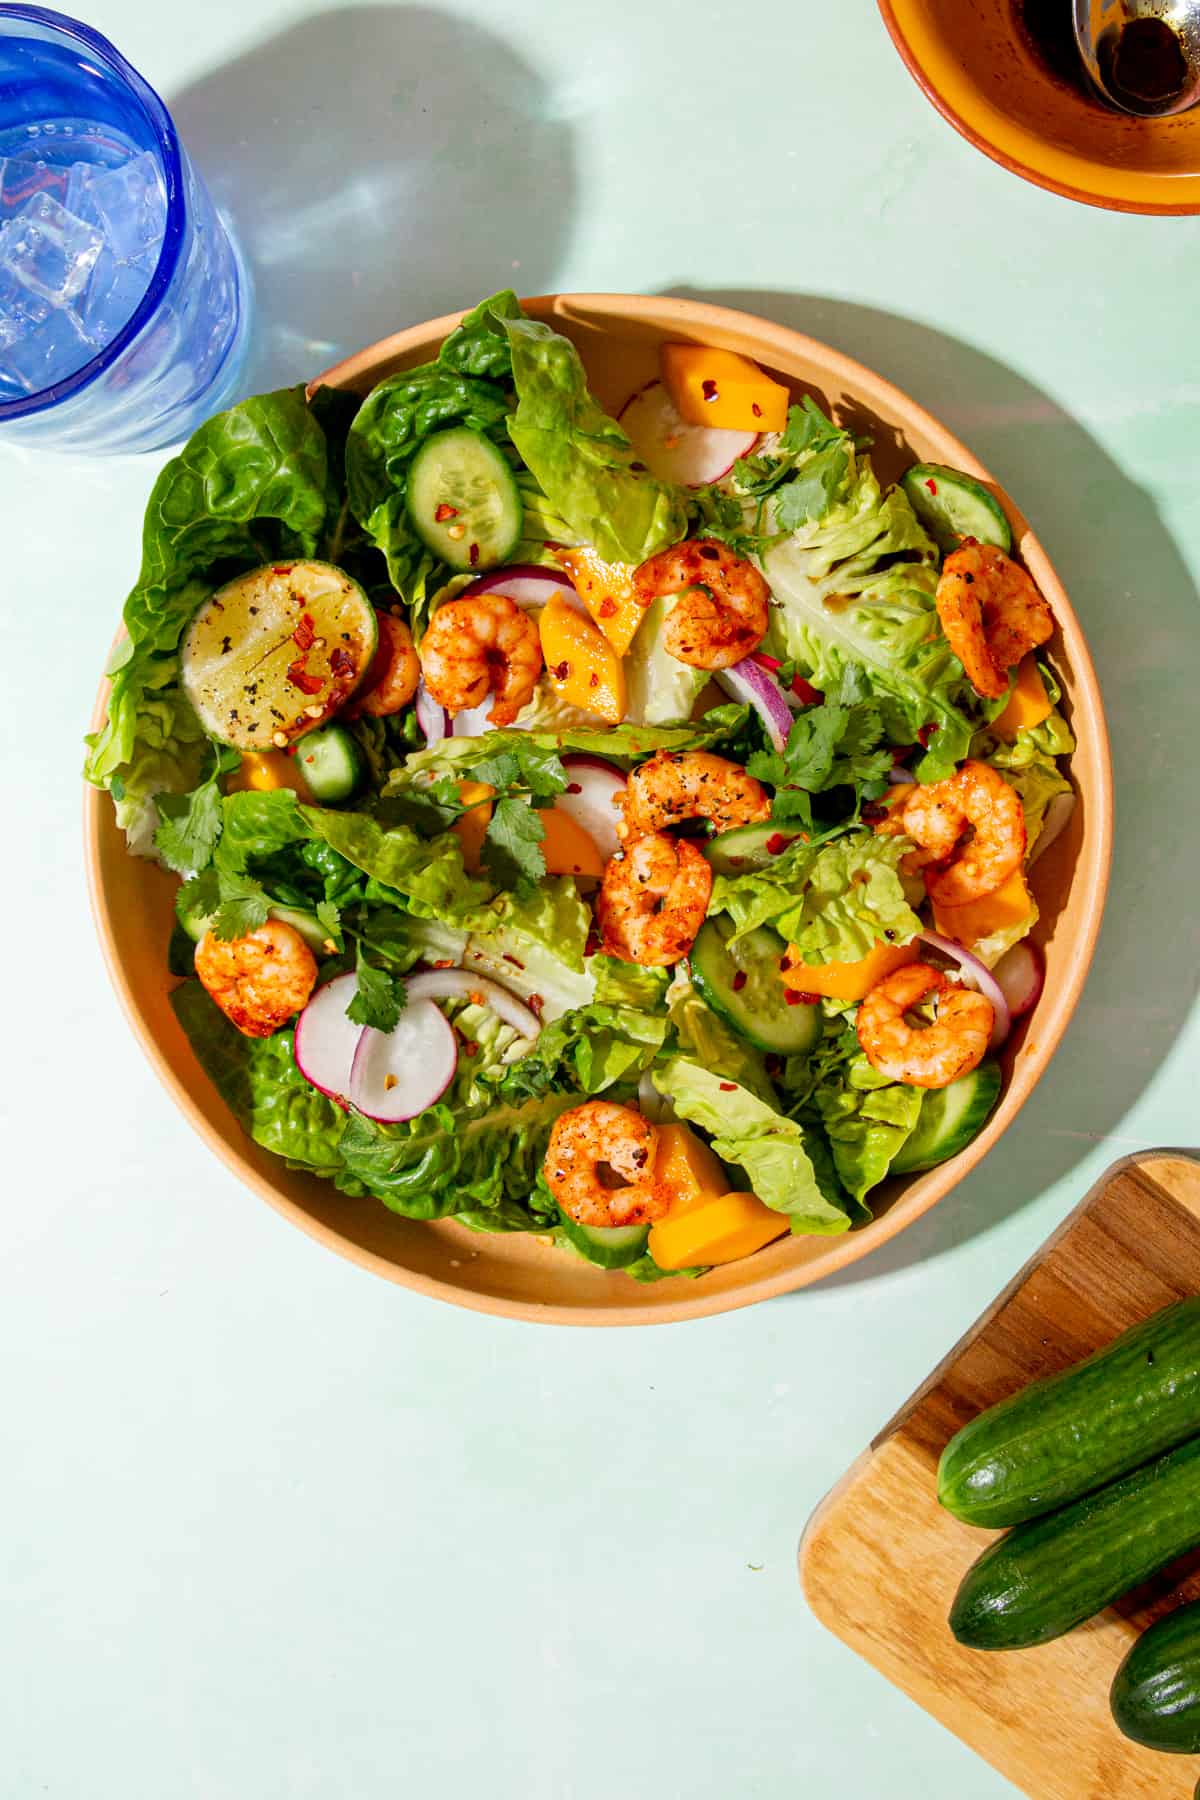 Lots of golden browned king prawns in a bowl of salad with sliced cucumber, radished and red onion next to some minu cucumbers on a chopping board.